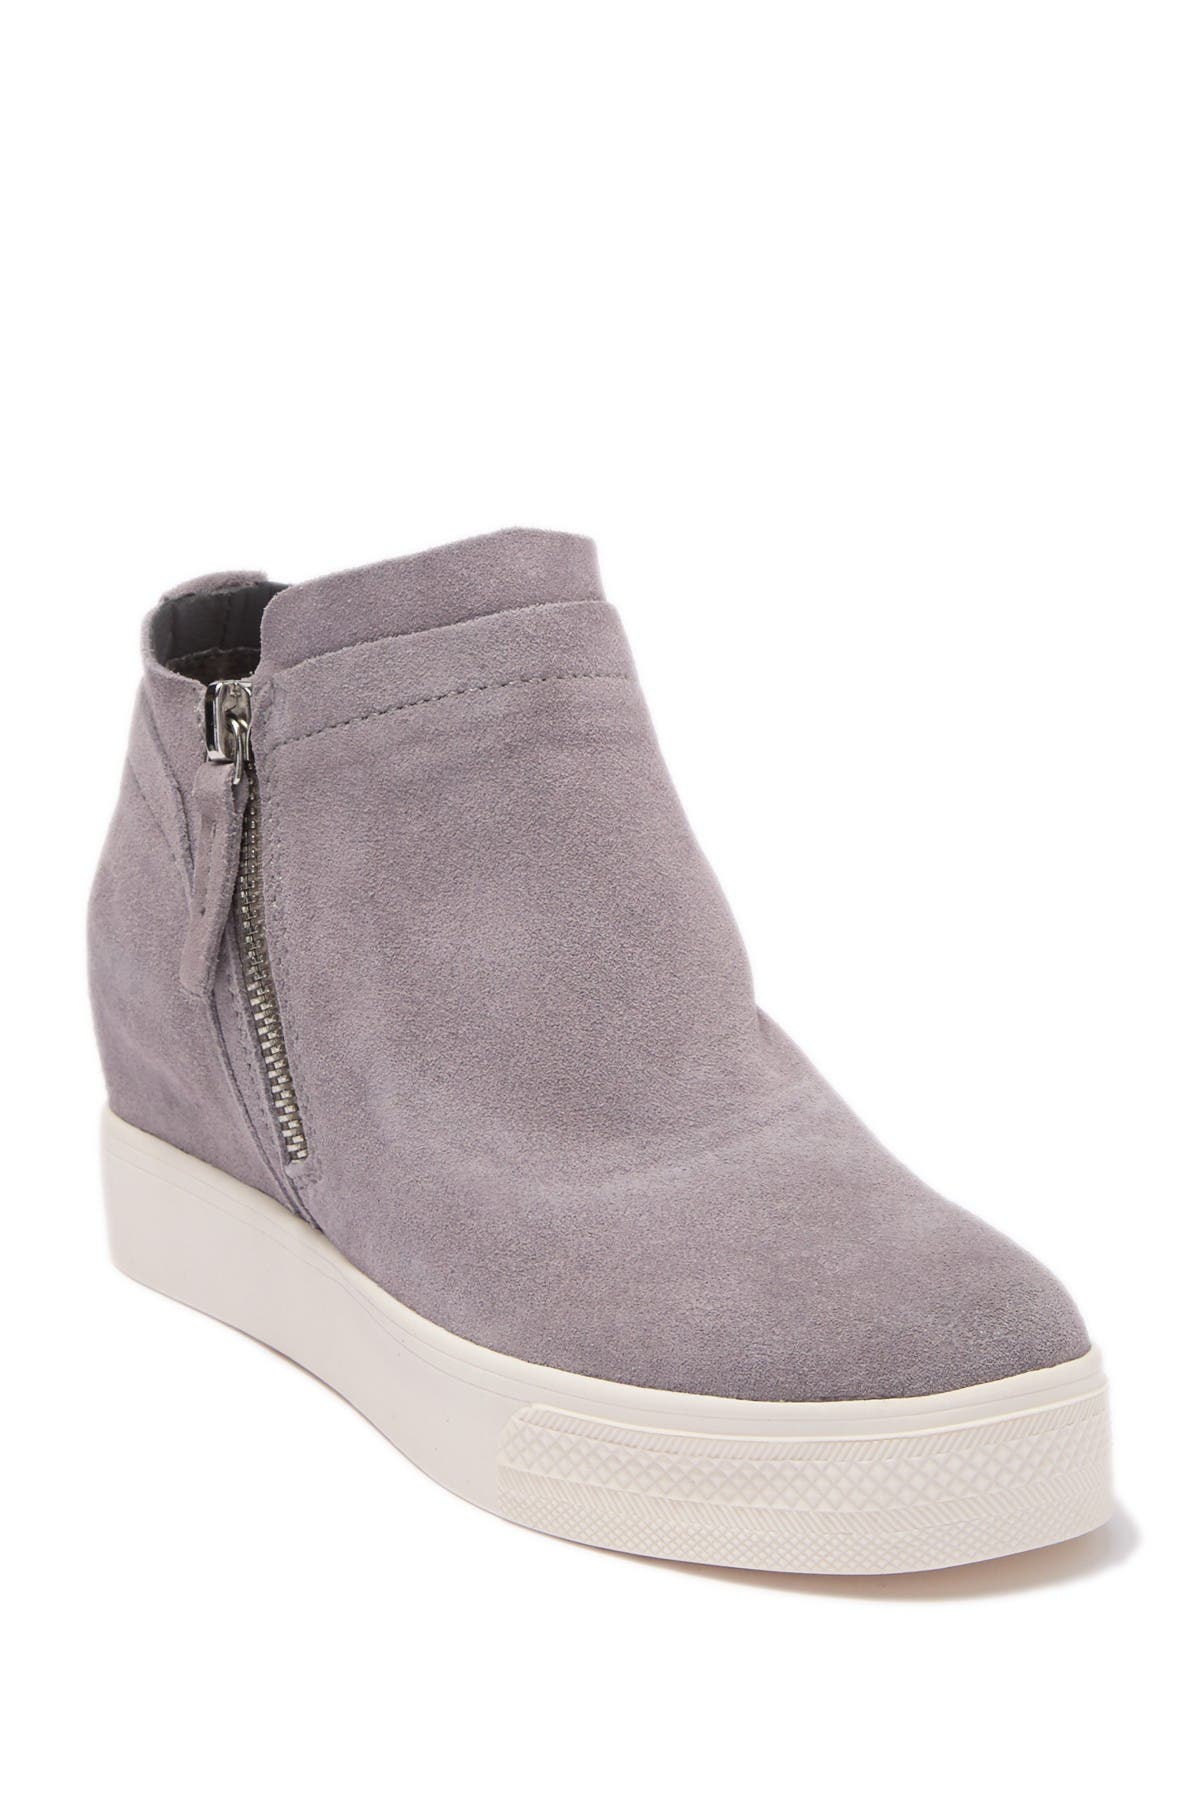 Dolce Vita | Winy Suede Wedge Sneaker 